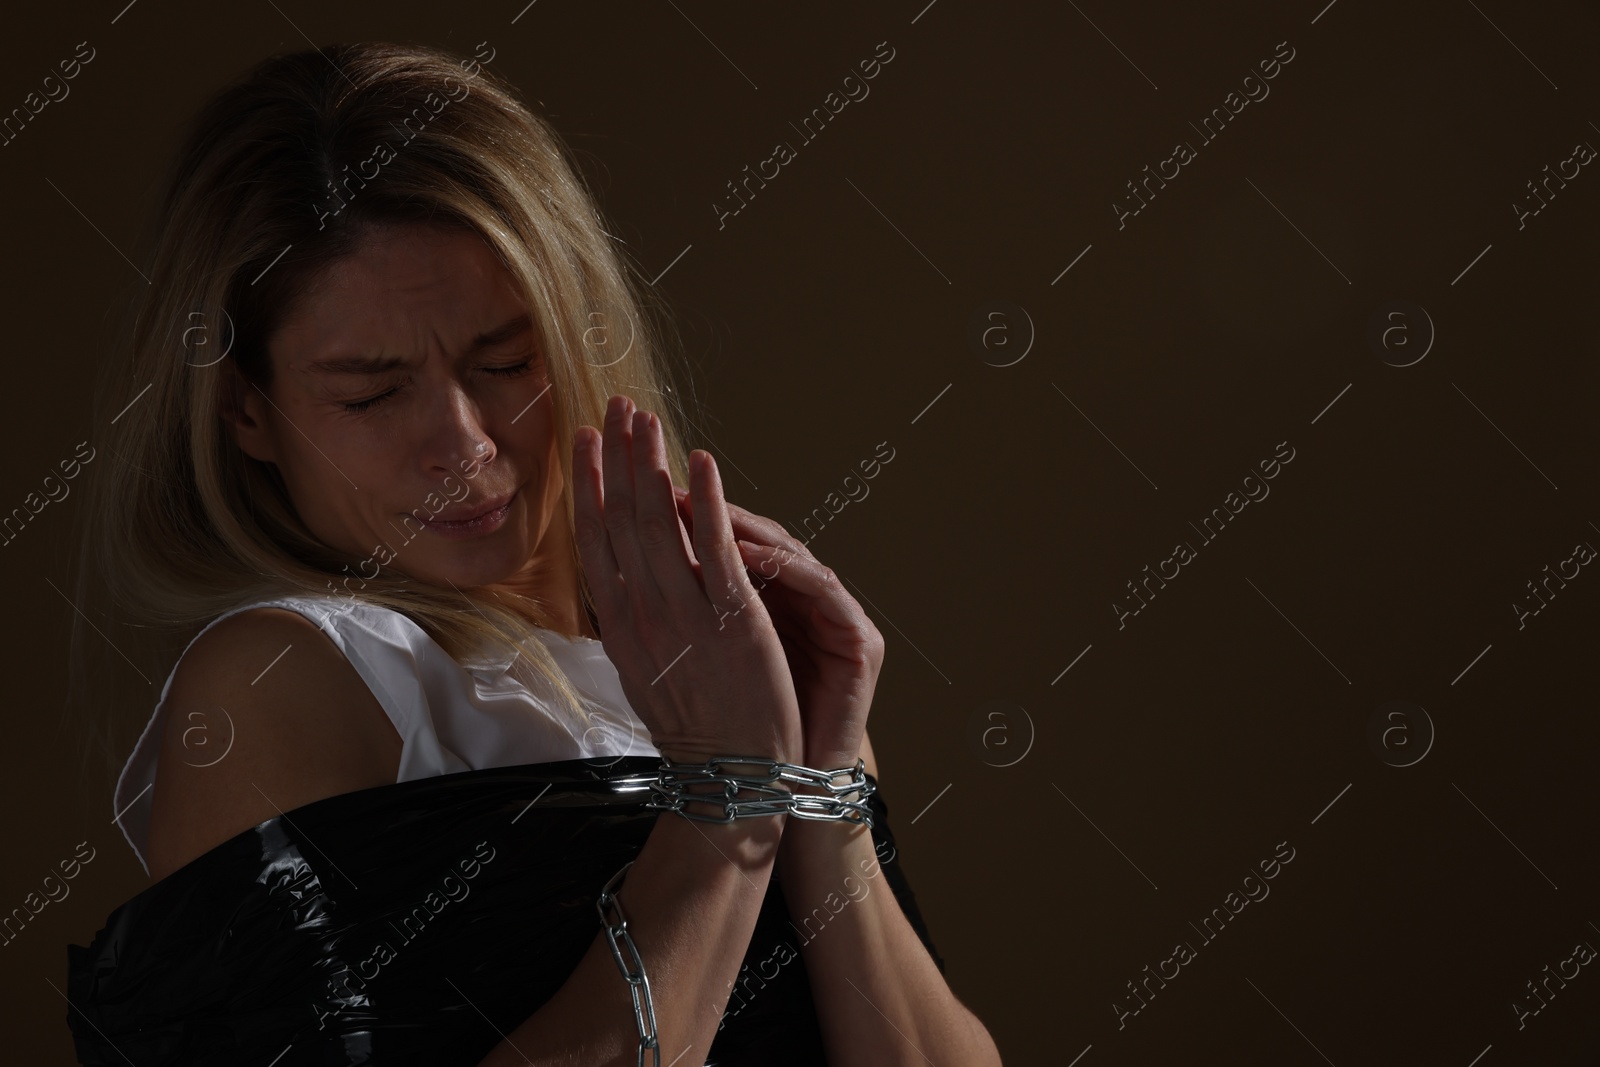 Photo of Scared woman taped up and taken hostage on dark background. Space for text